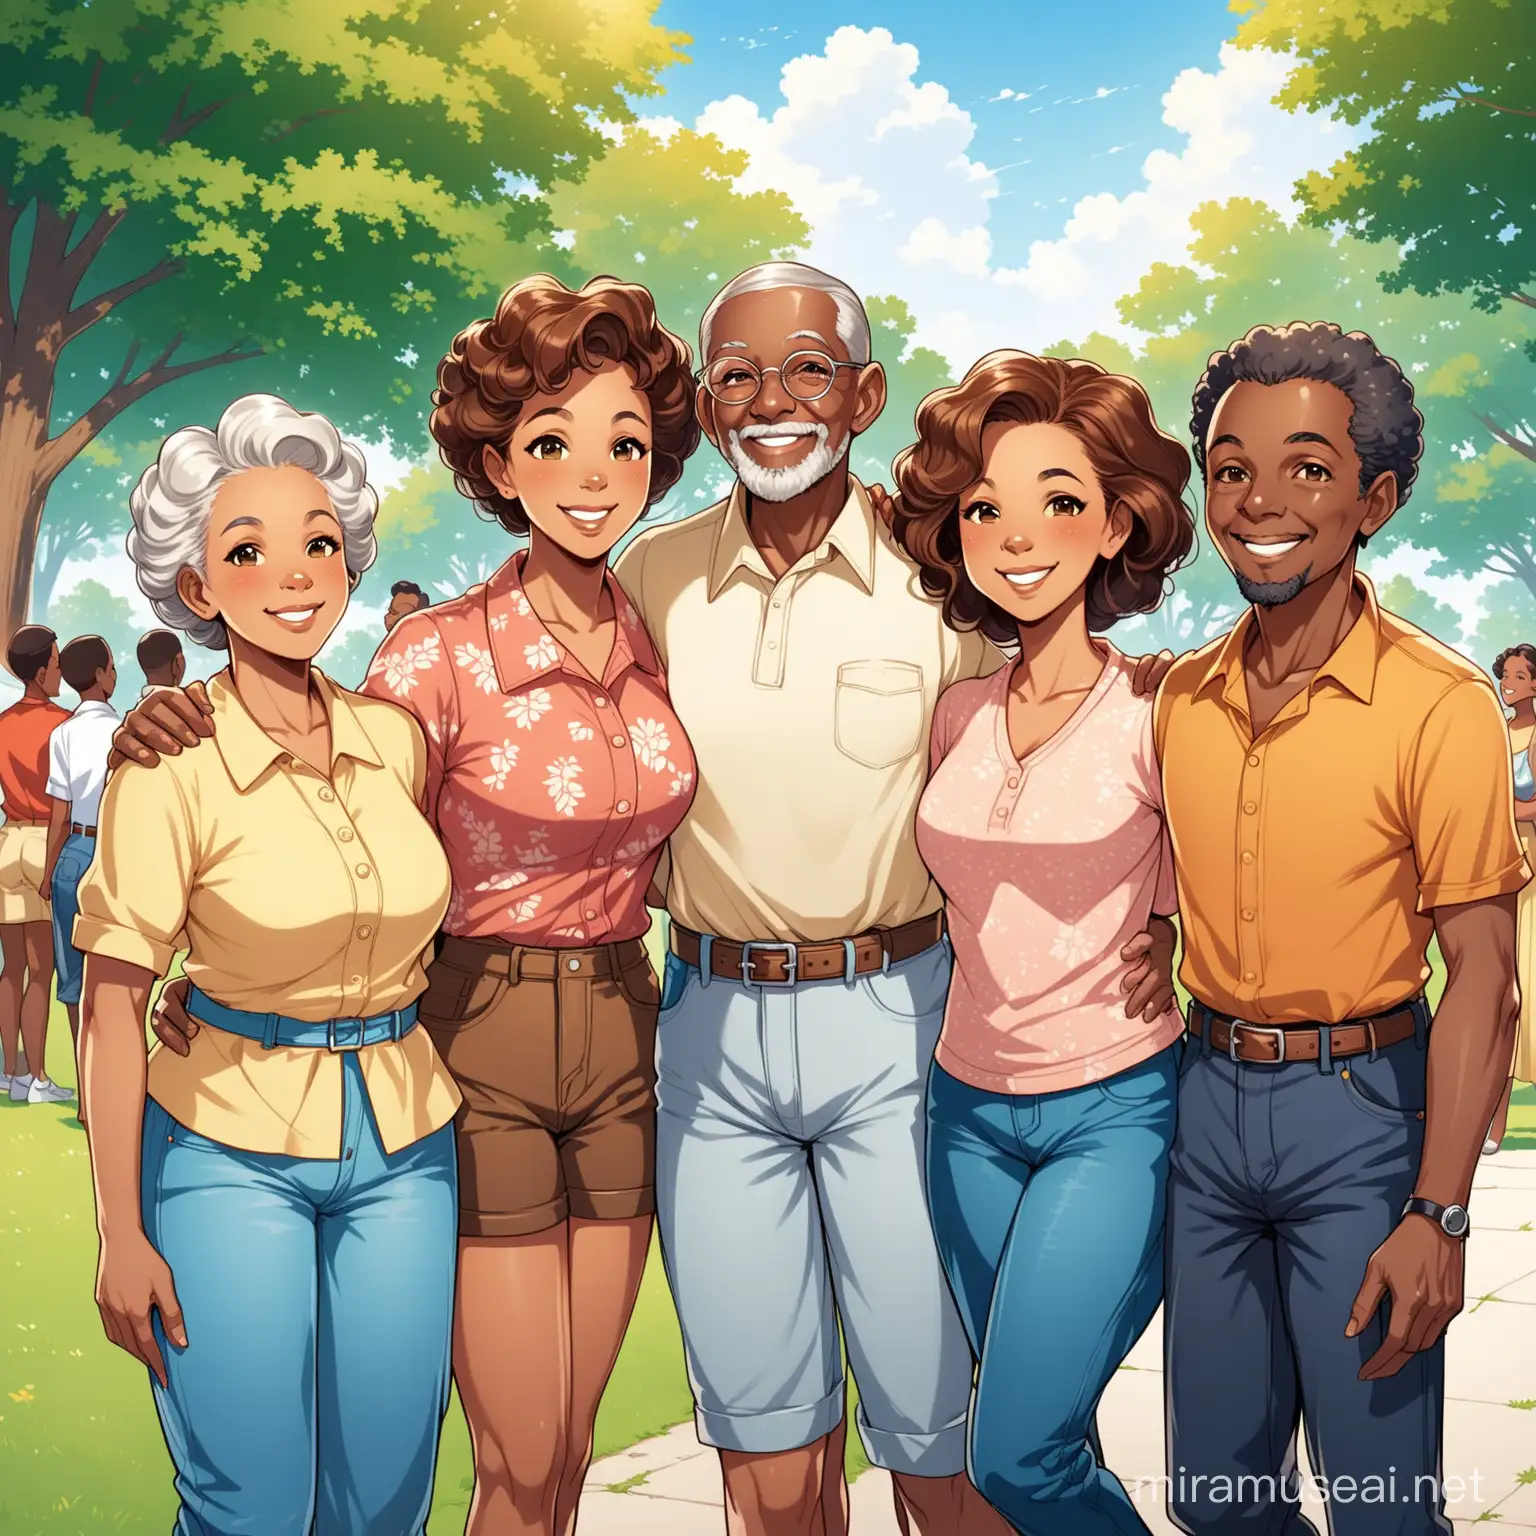 African American Family Reunion at the Park in 1900s Cartoon Style